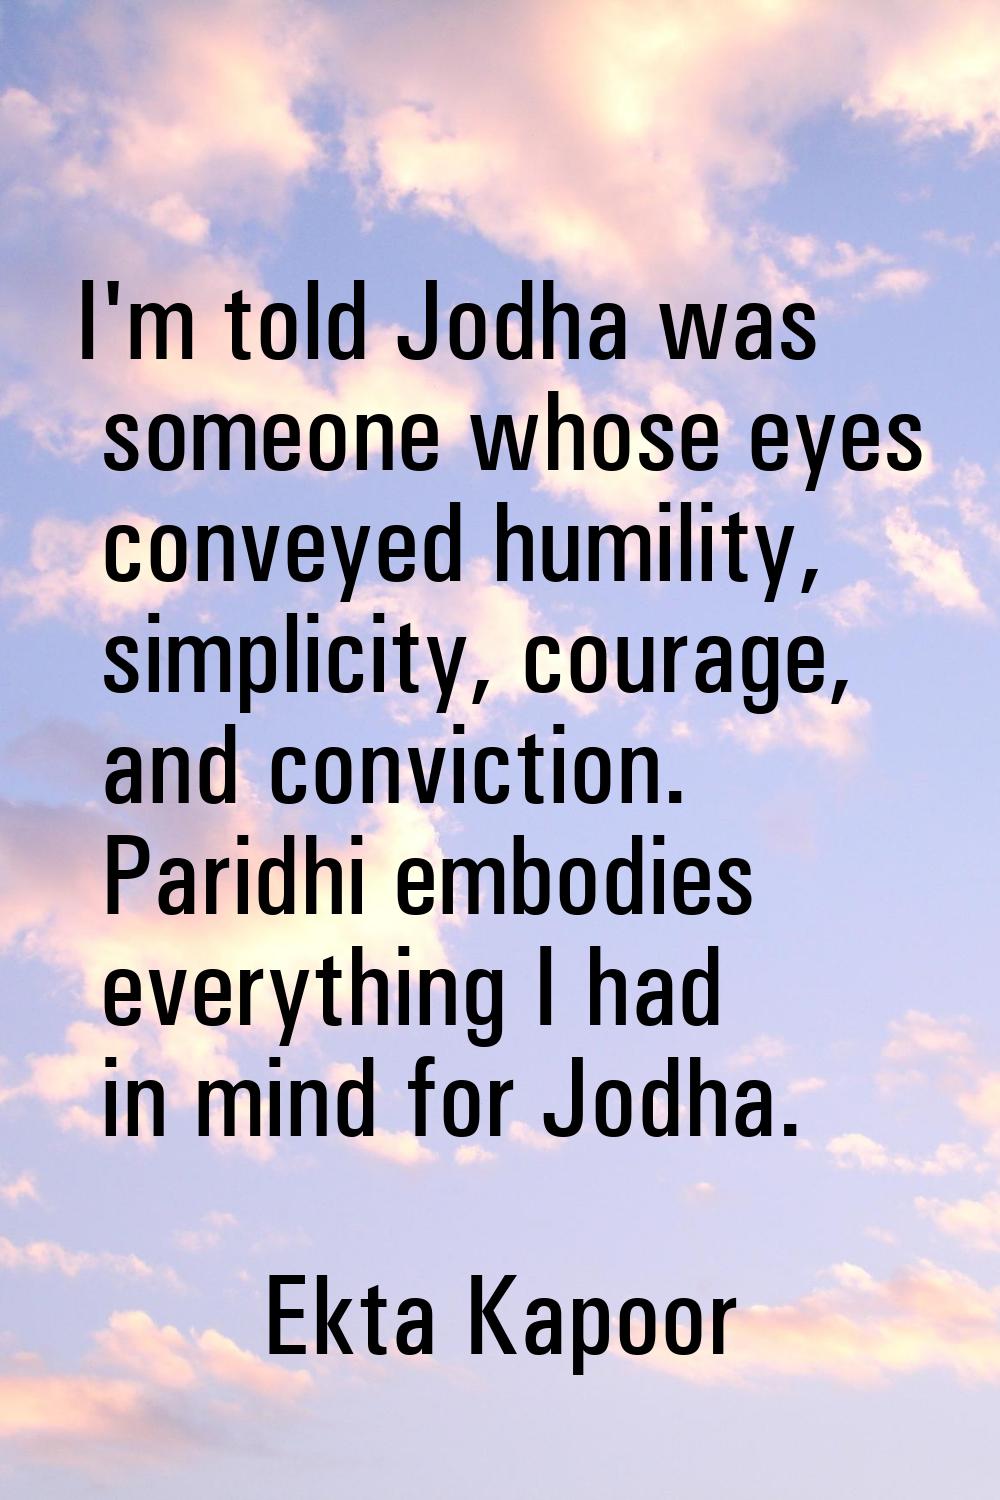 I'm told Jodha was someone whose eyes conveyed humility, simplicity, courage, and conviction. Parid